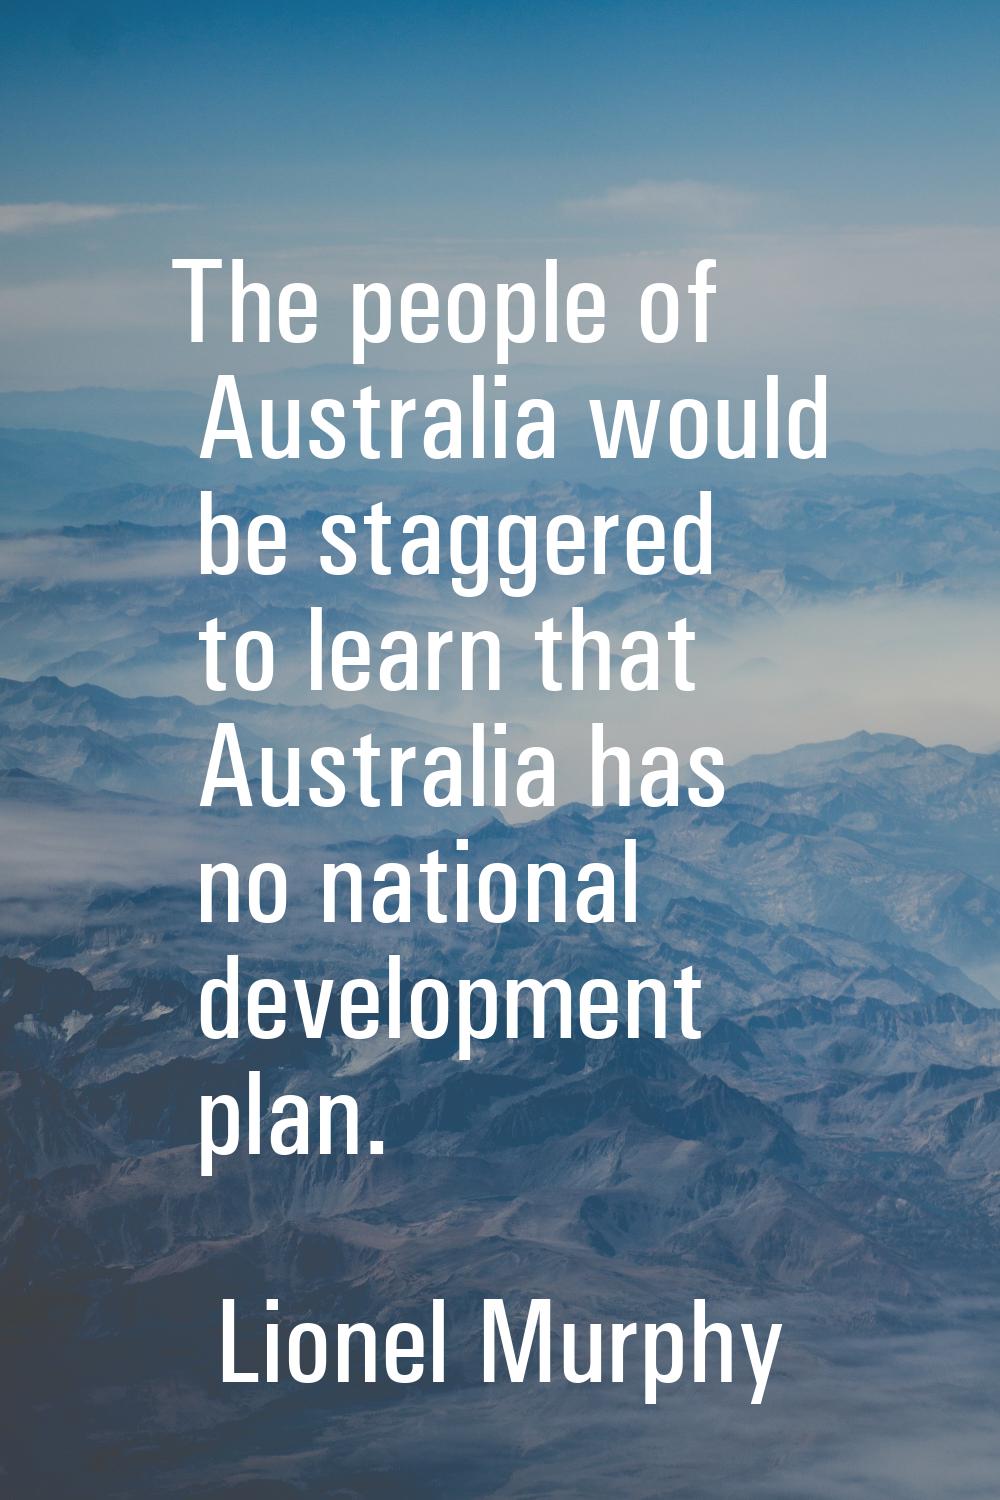 The people of Australia would be staggered to learn that Australia has no national development plan